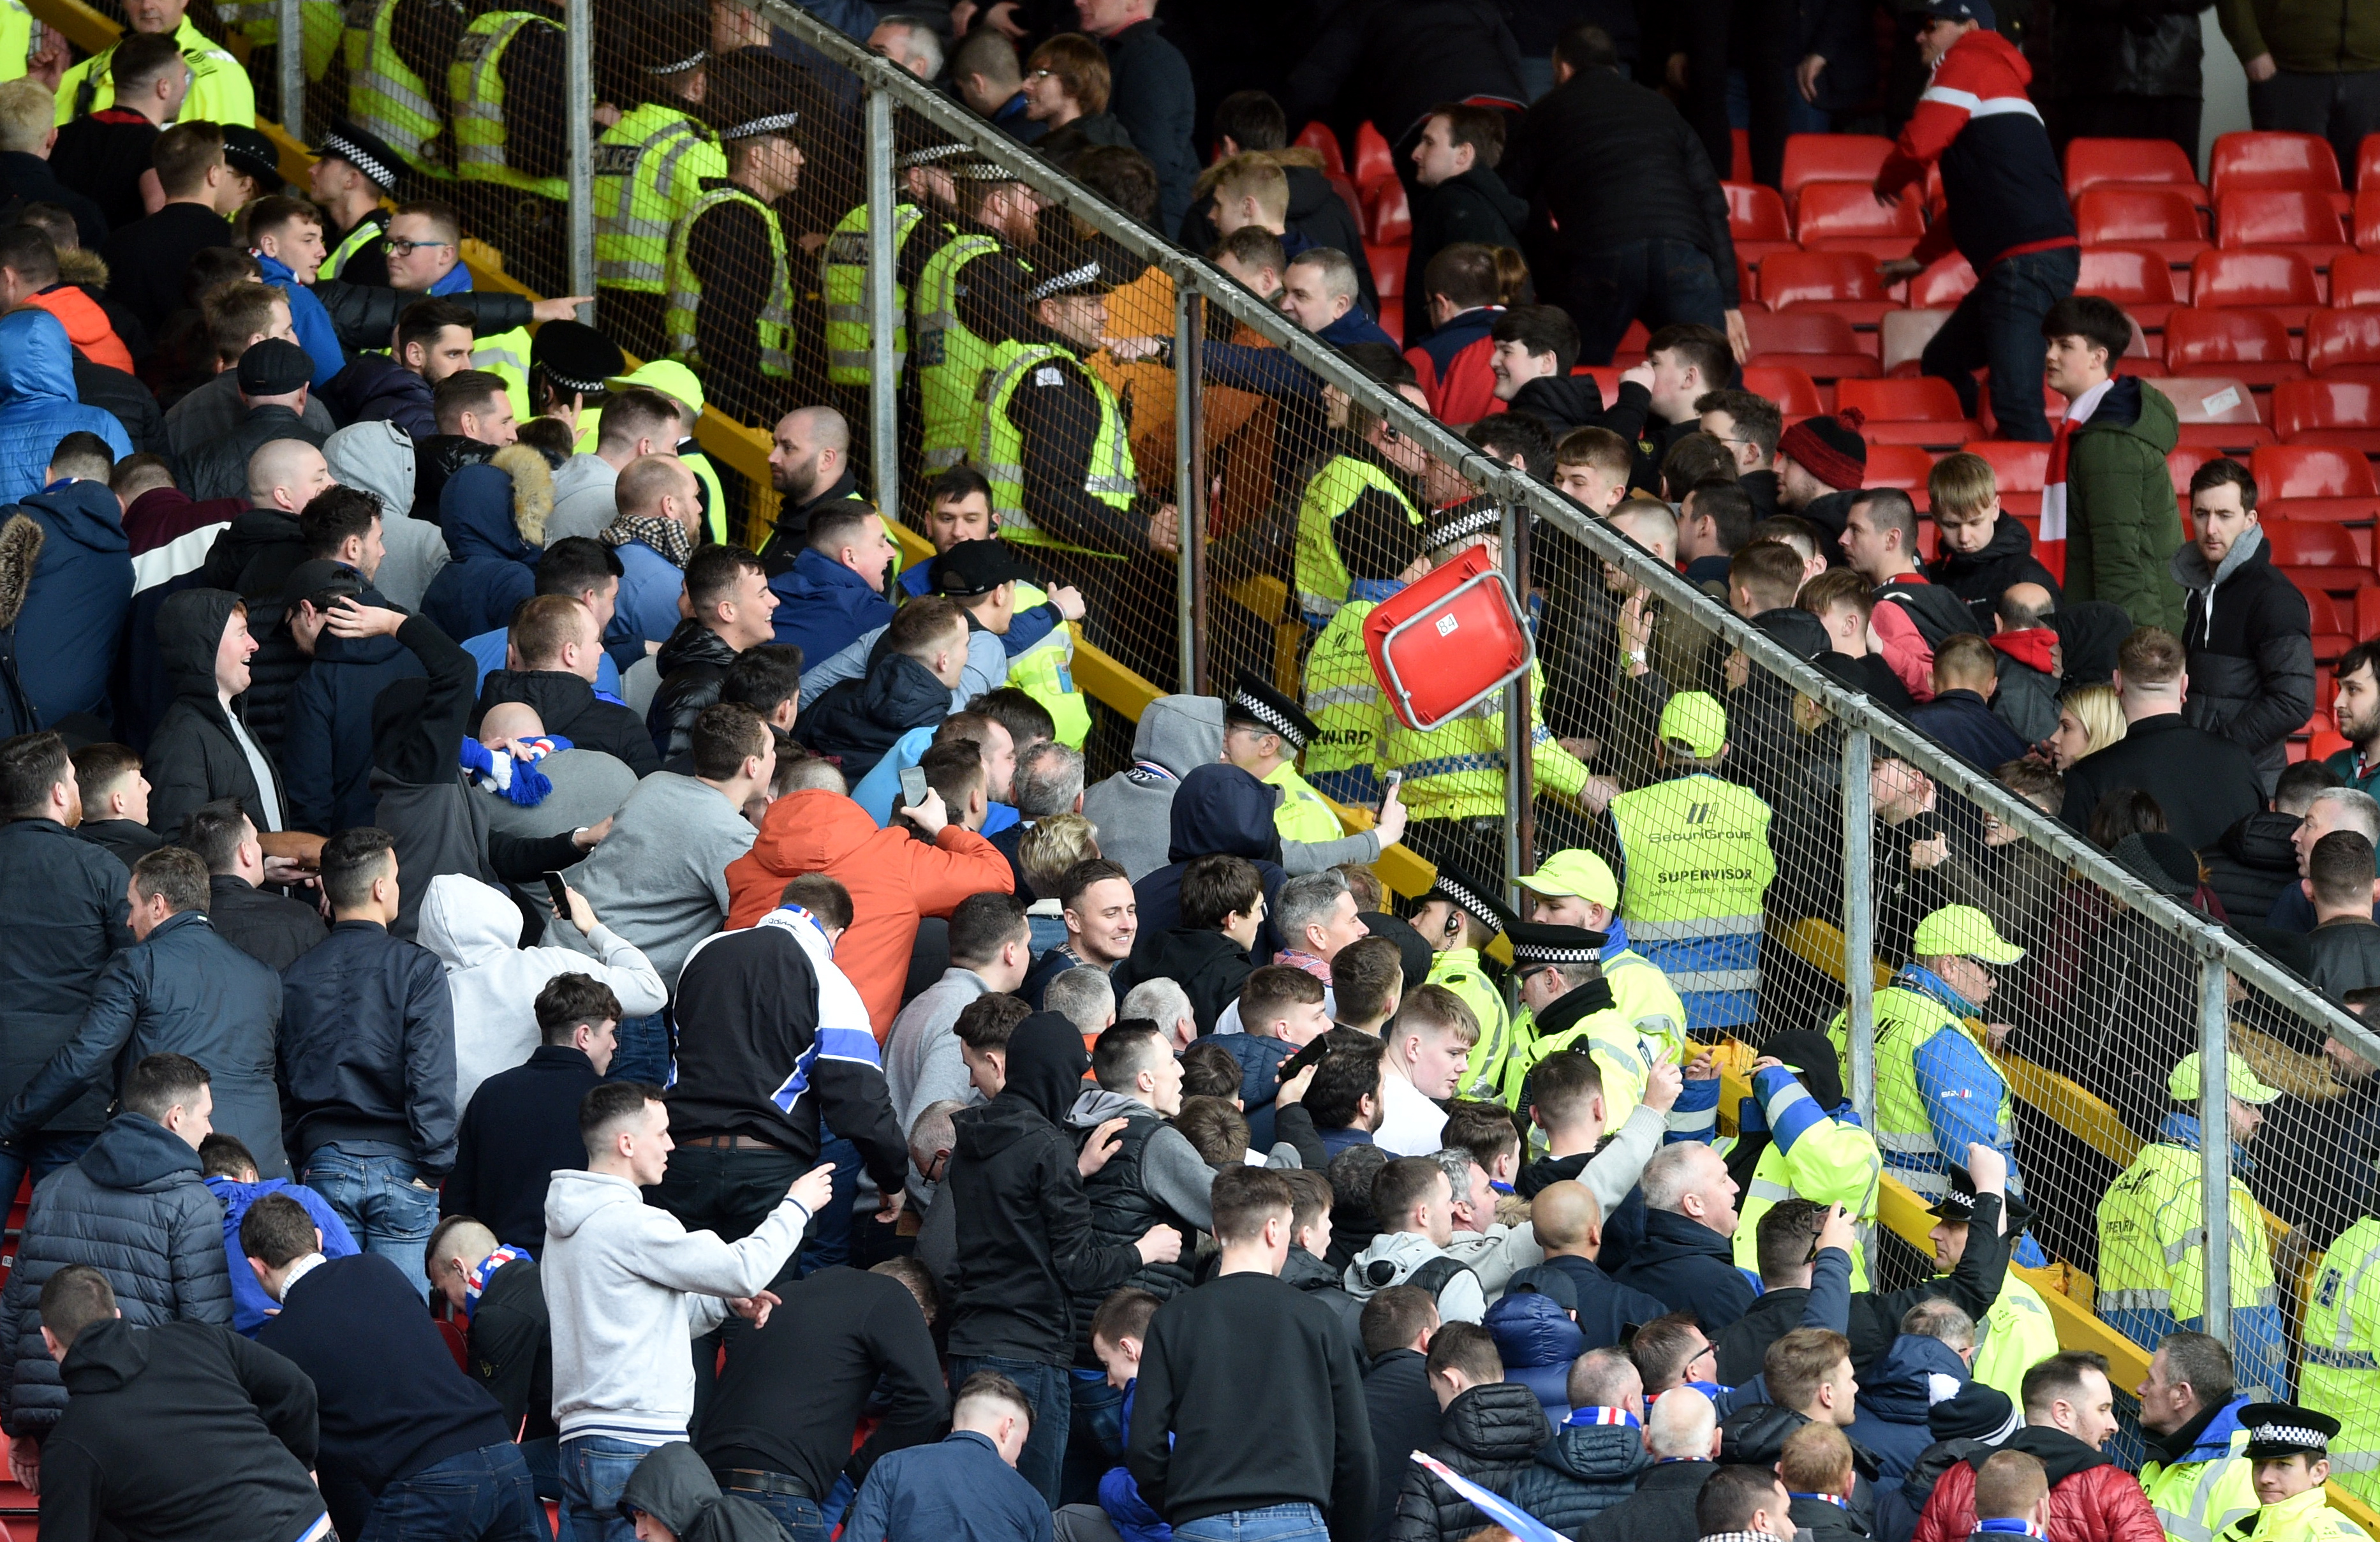 A seat is thrown into the Aberdeen area of fans after full time.